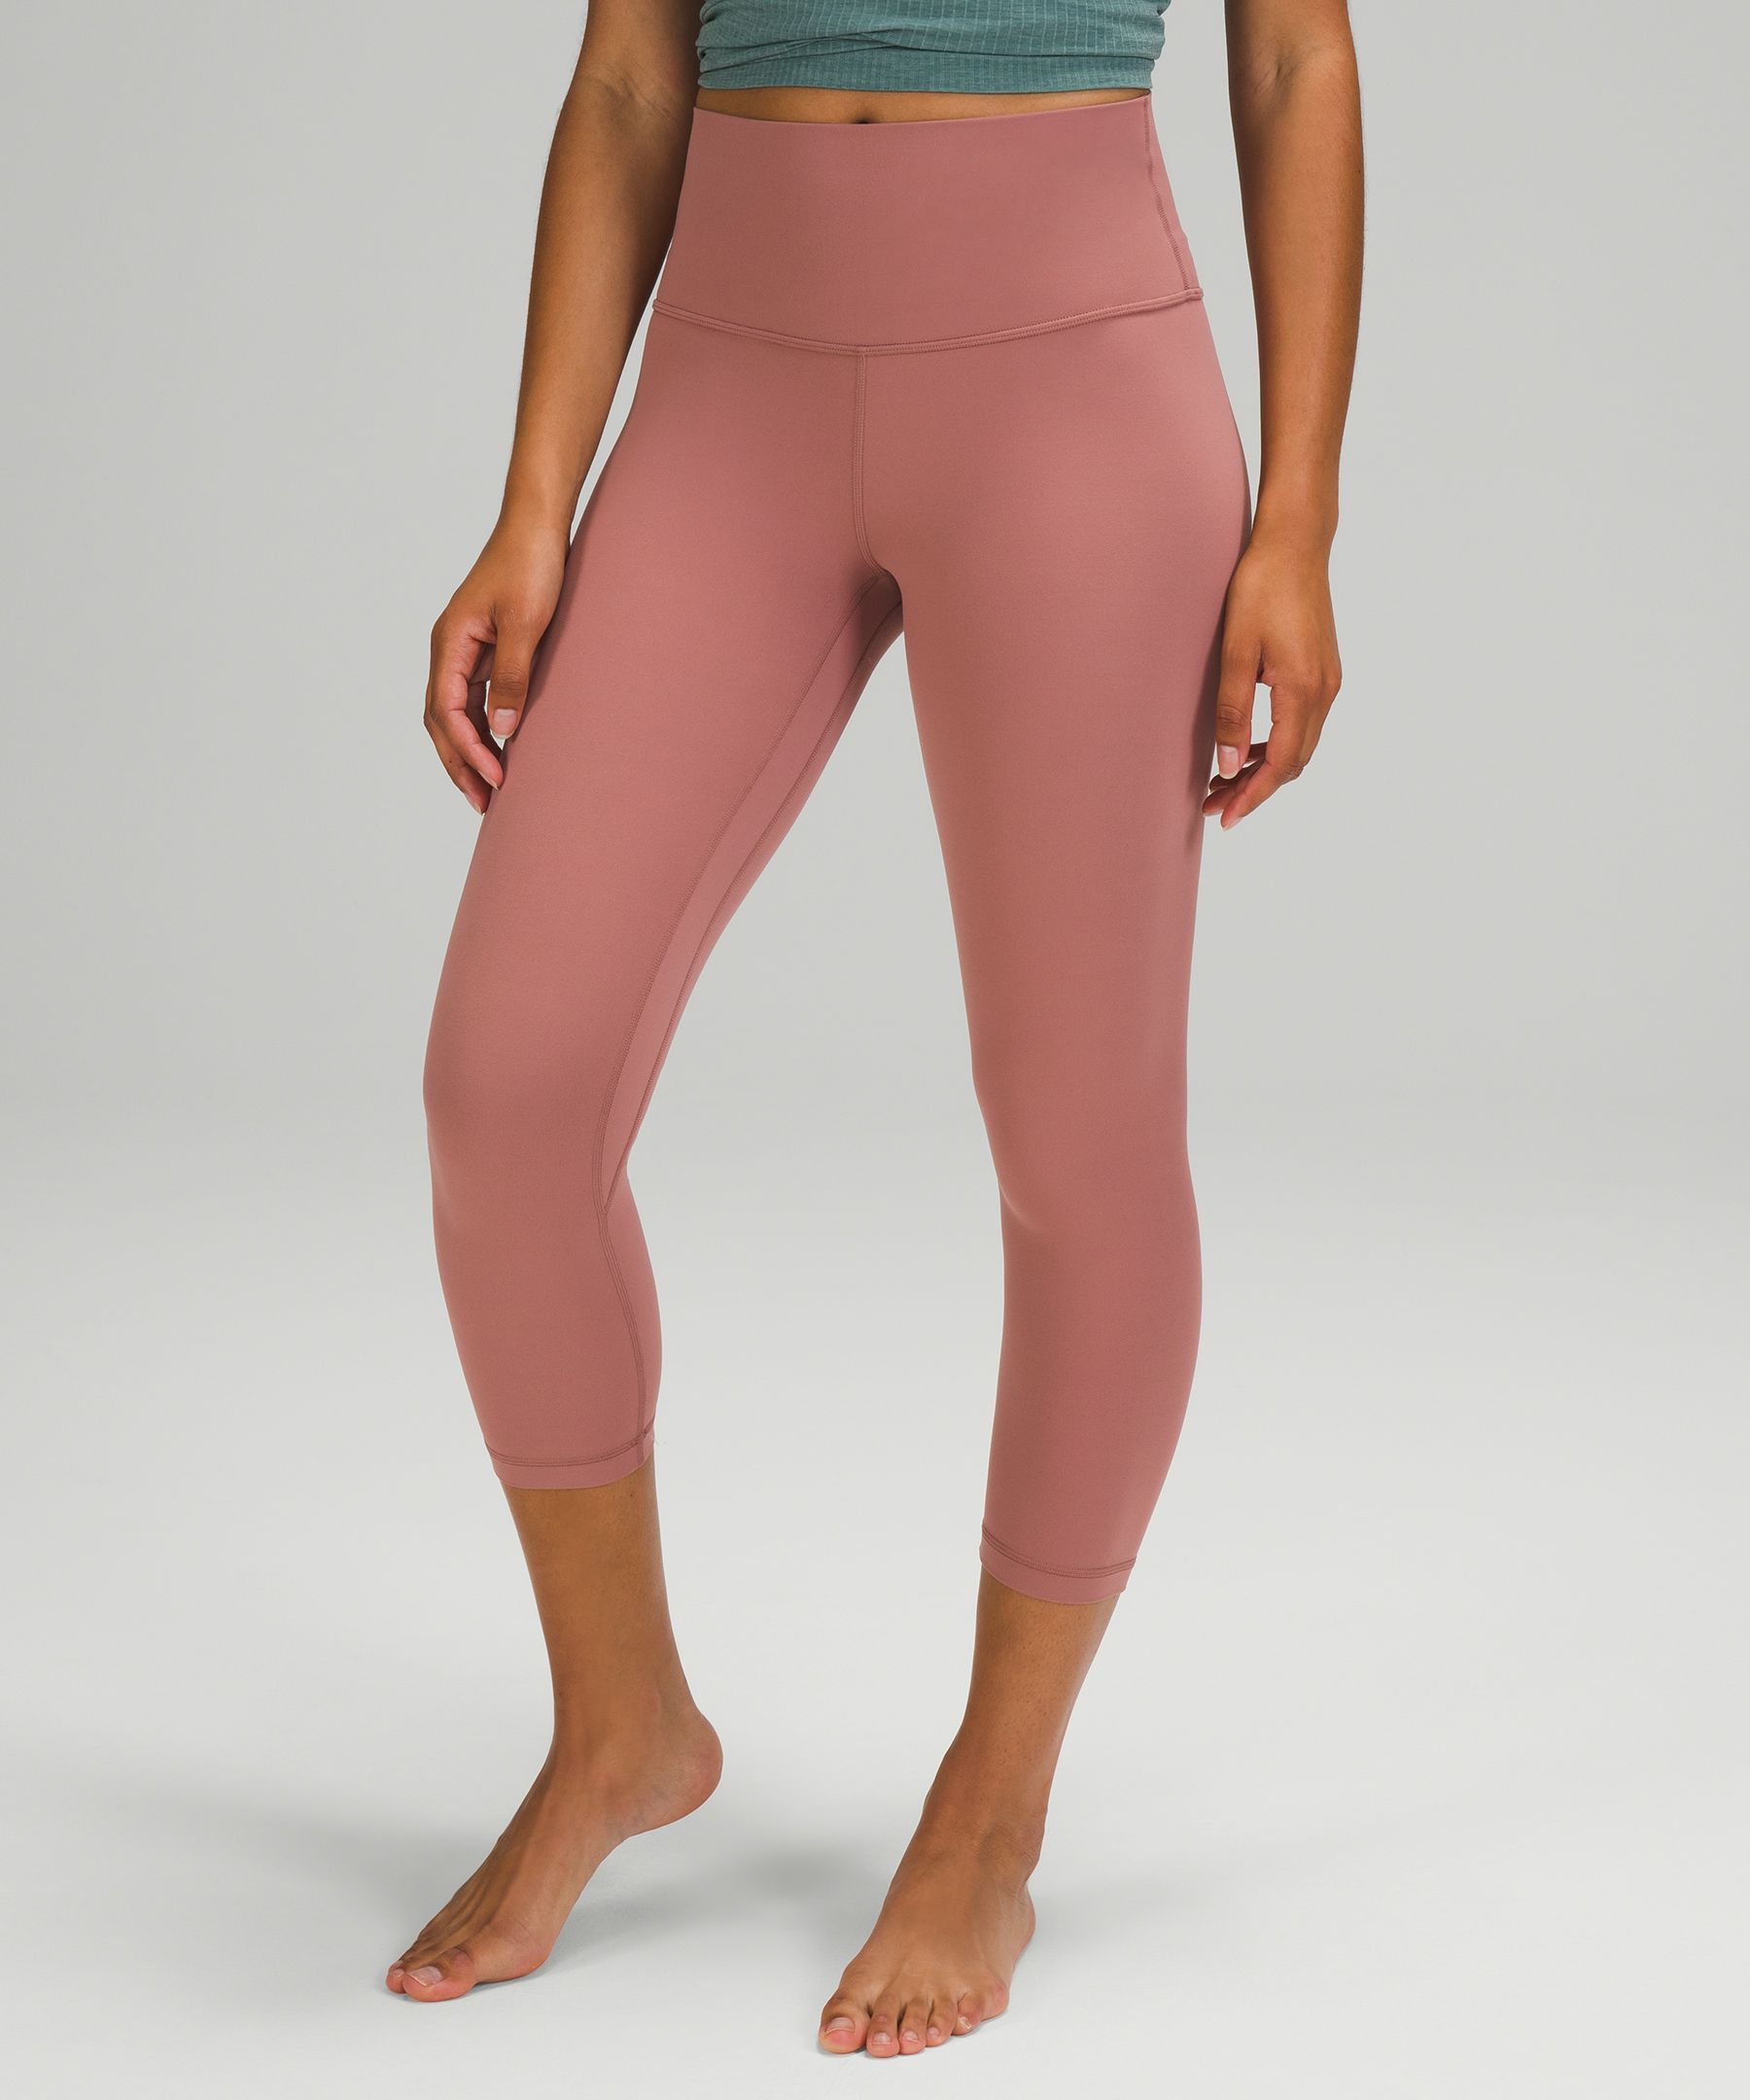 Lululemon Align™ High-rise Crop 21" In Spiced Chai